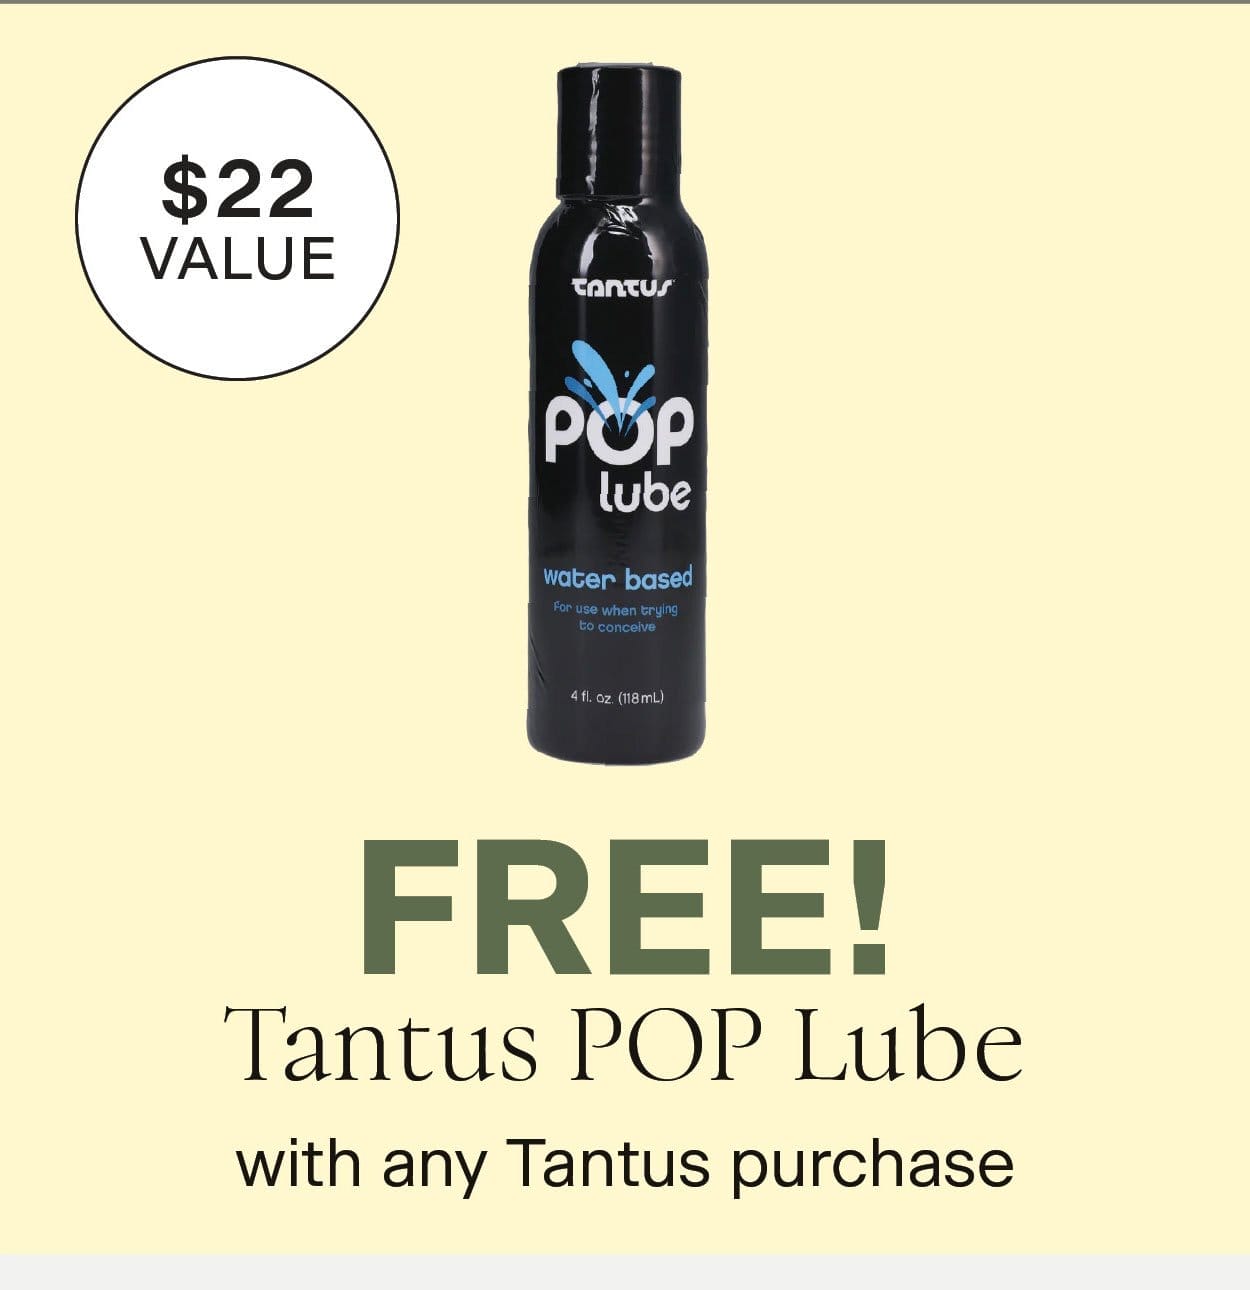 FREE Tantus POP lube with any Tantus purchase